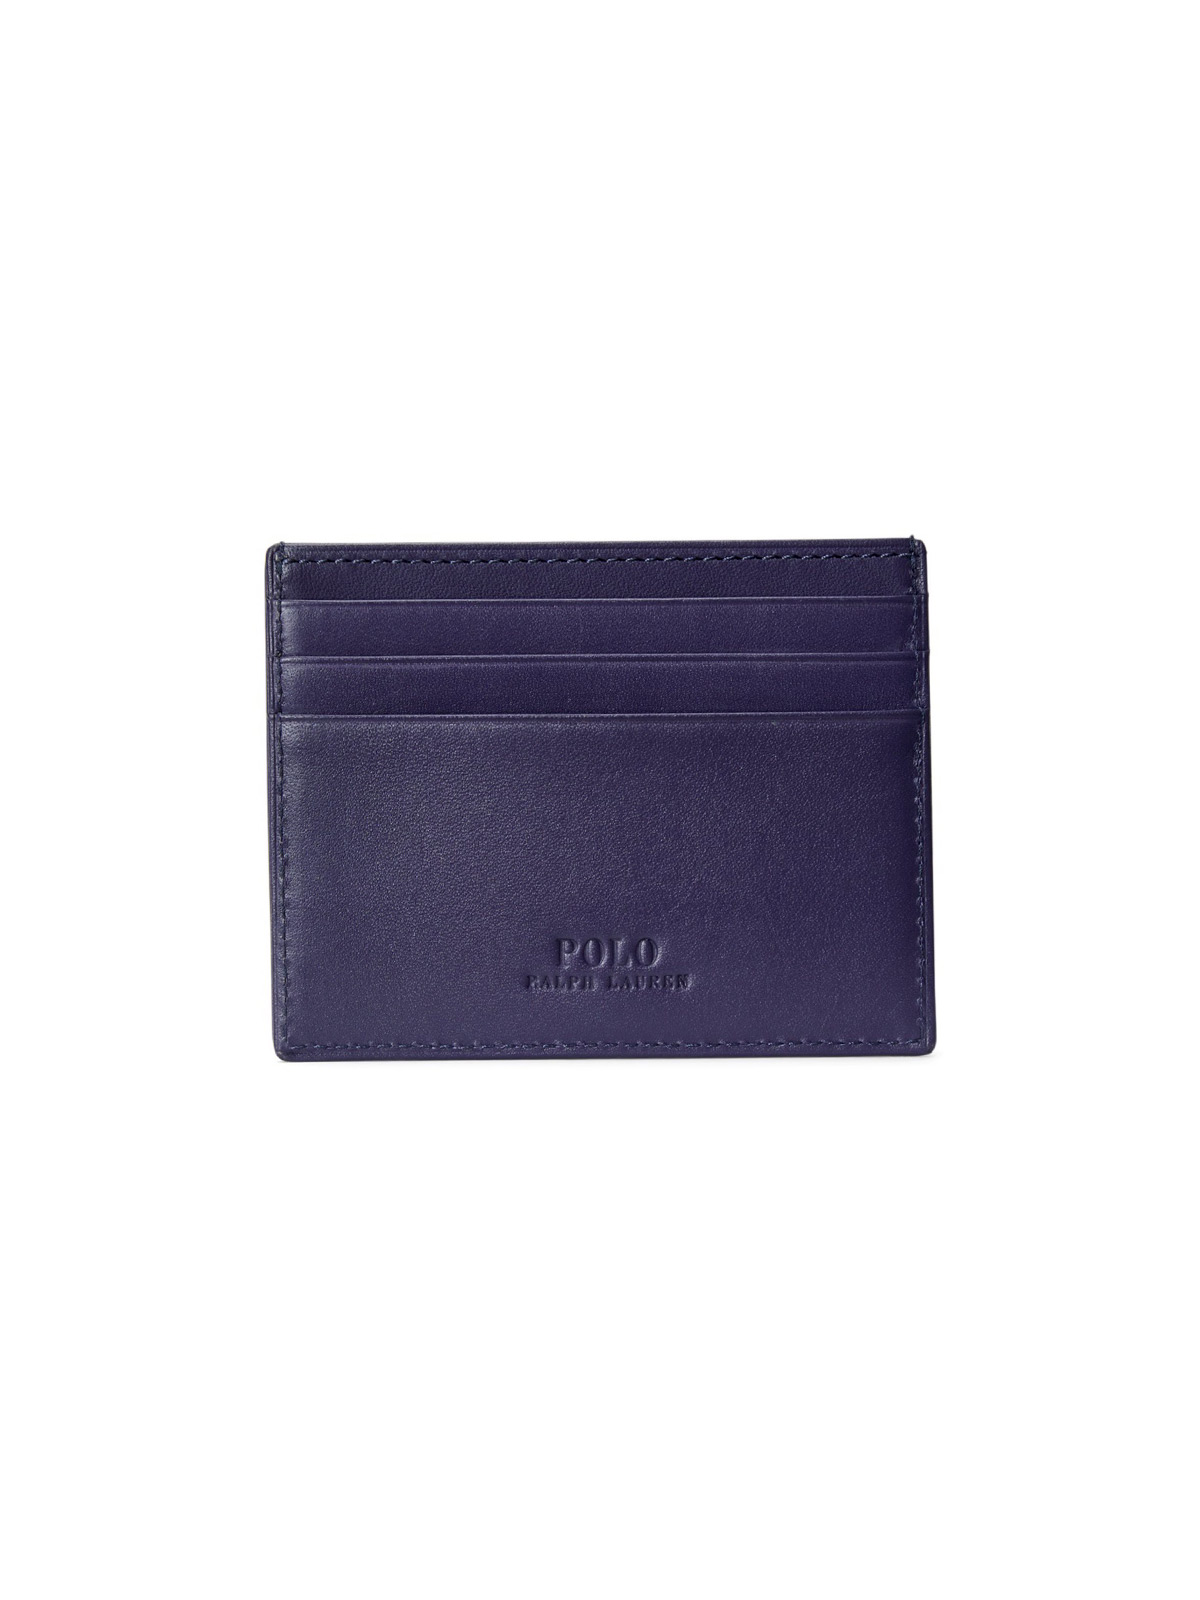 Picture of Polo Ralph Lauren | Wallet Card Case